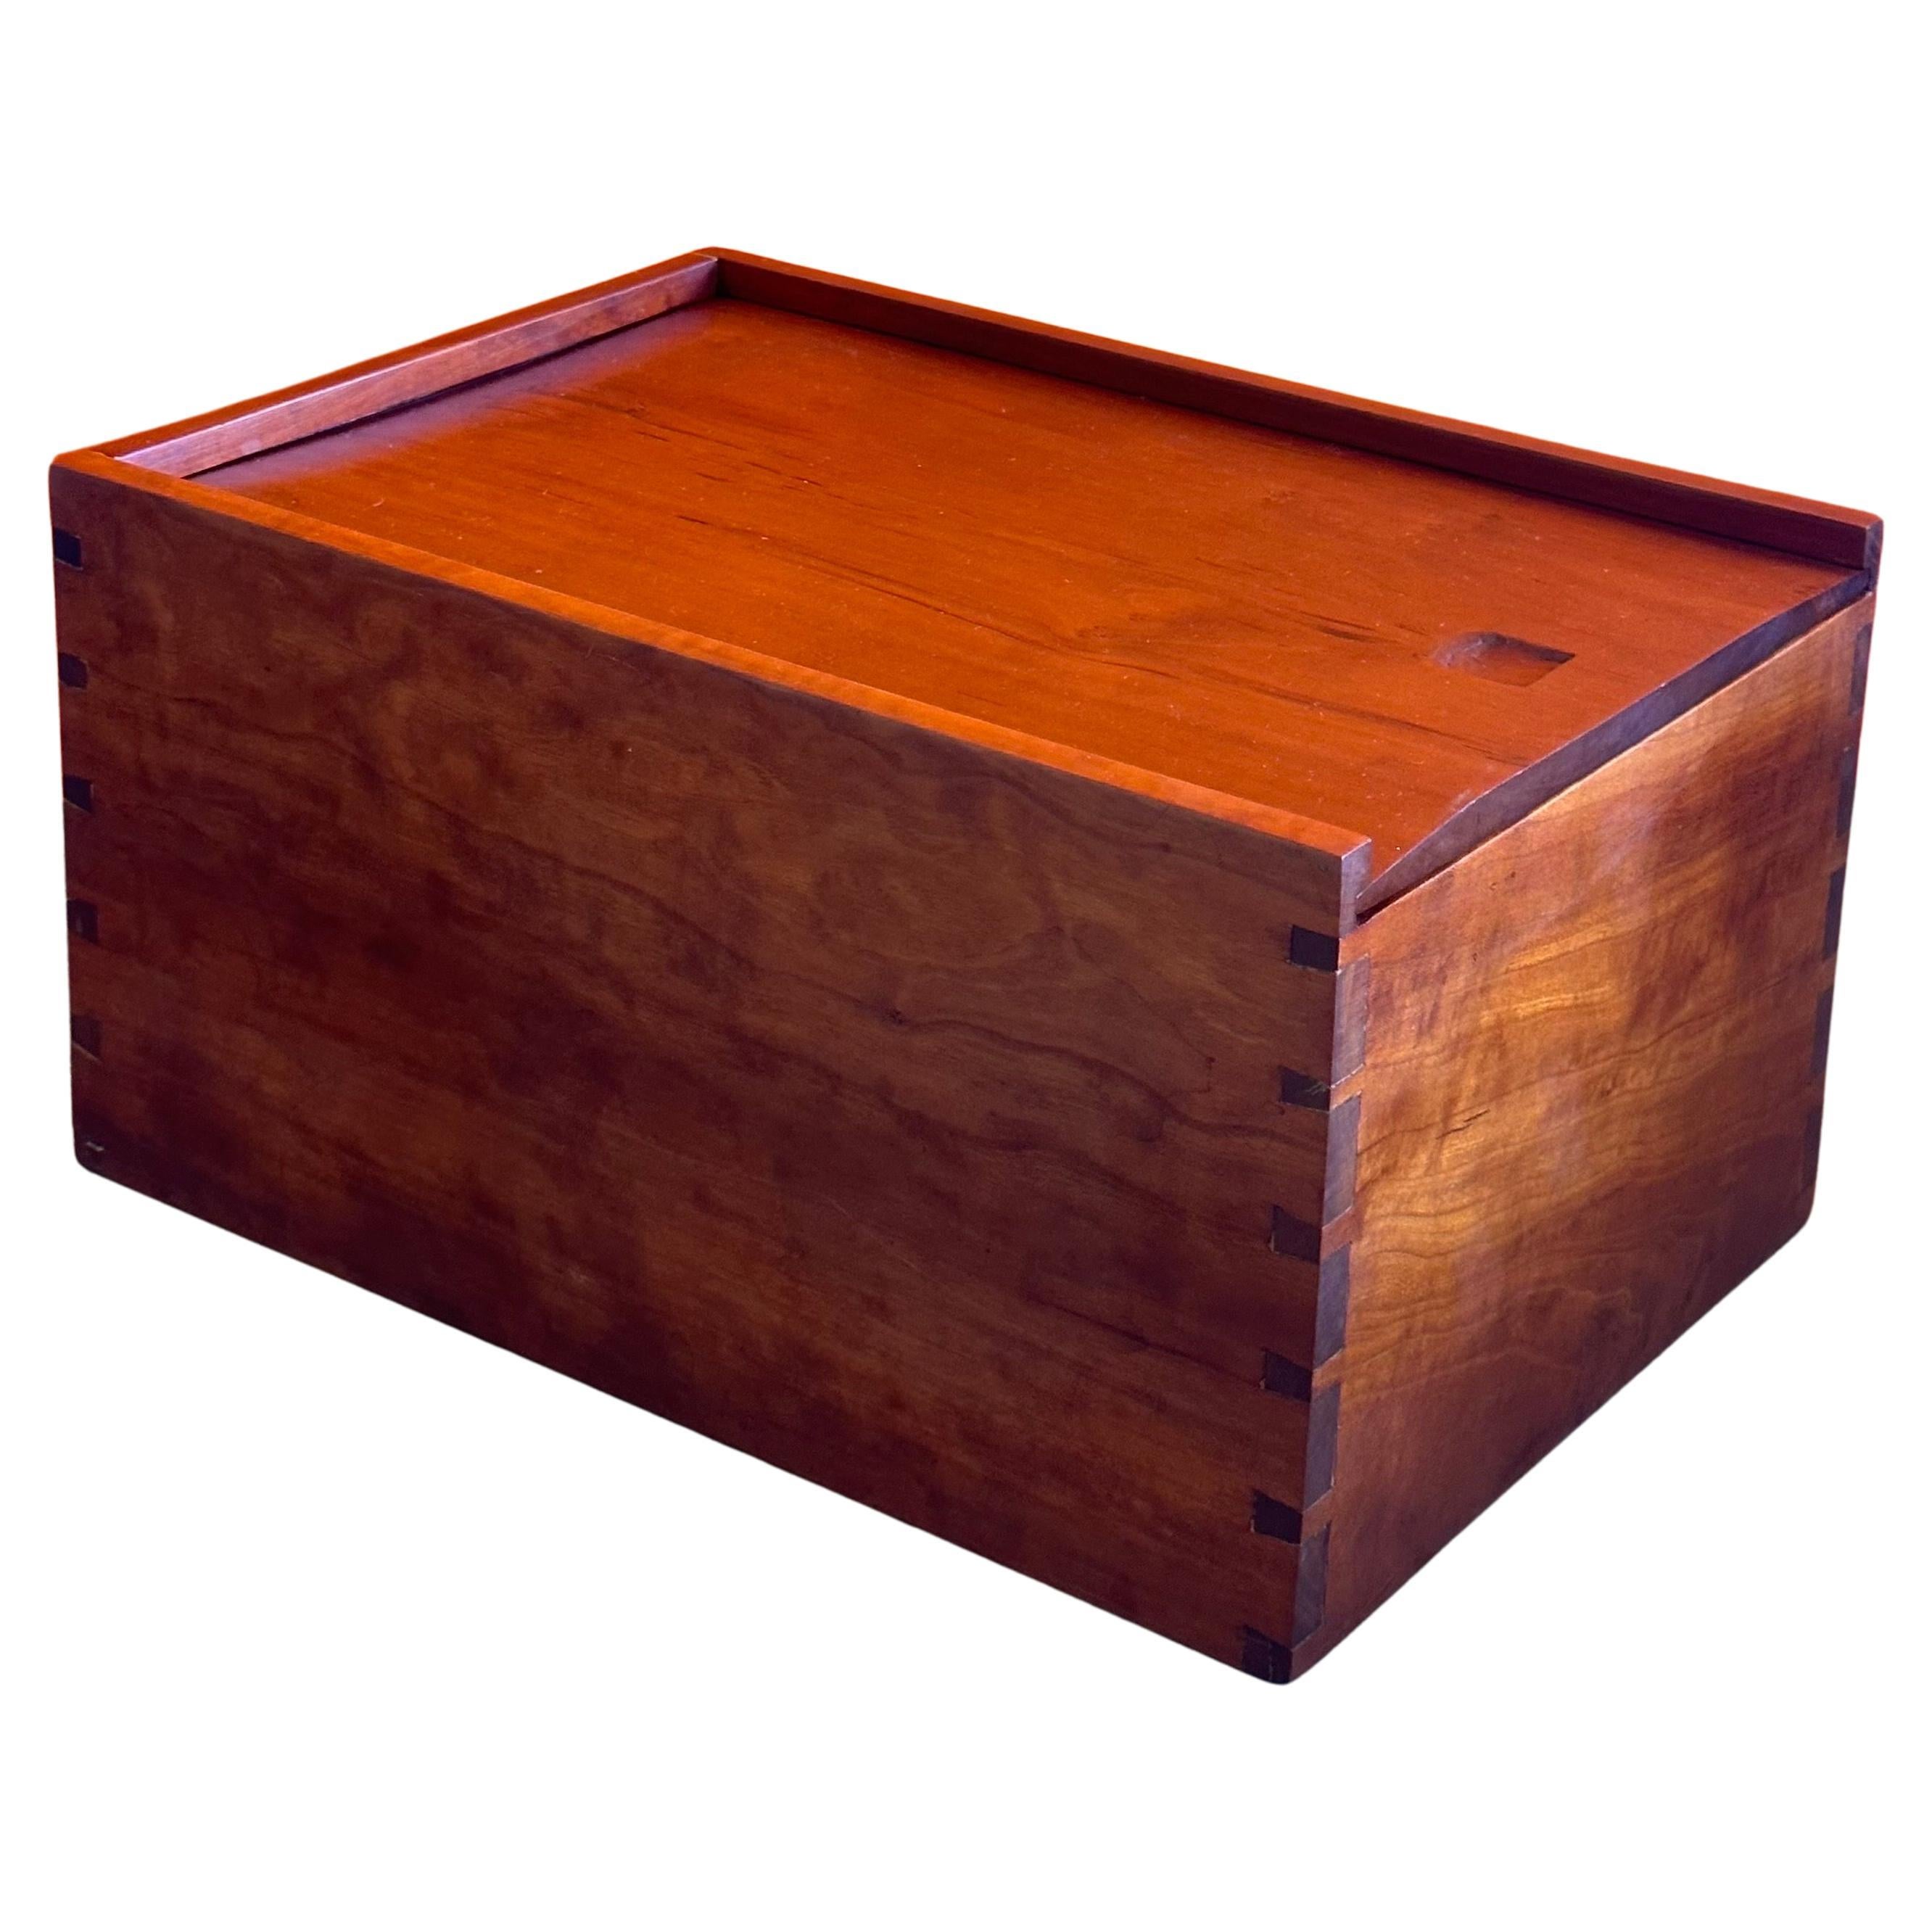 Handmade Cherry Wood Shaker Box with Lid by Bruce Oxford for Sierra Shaker